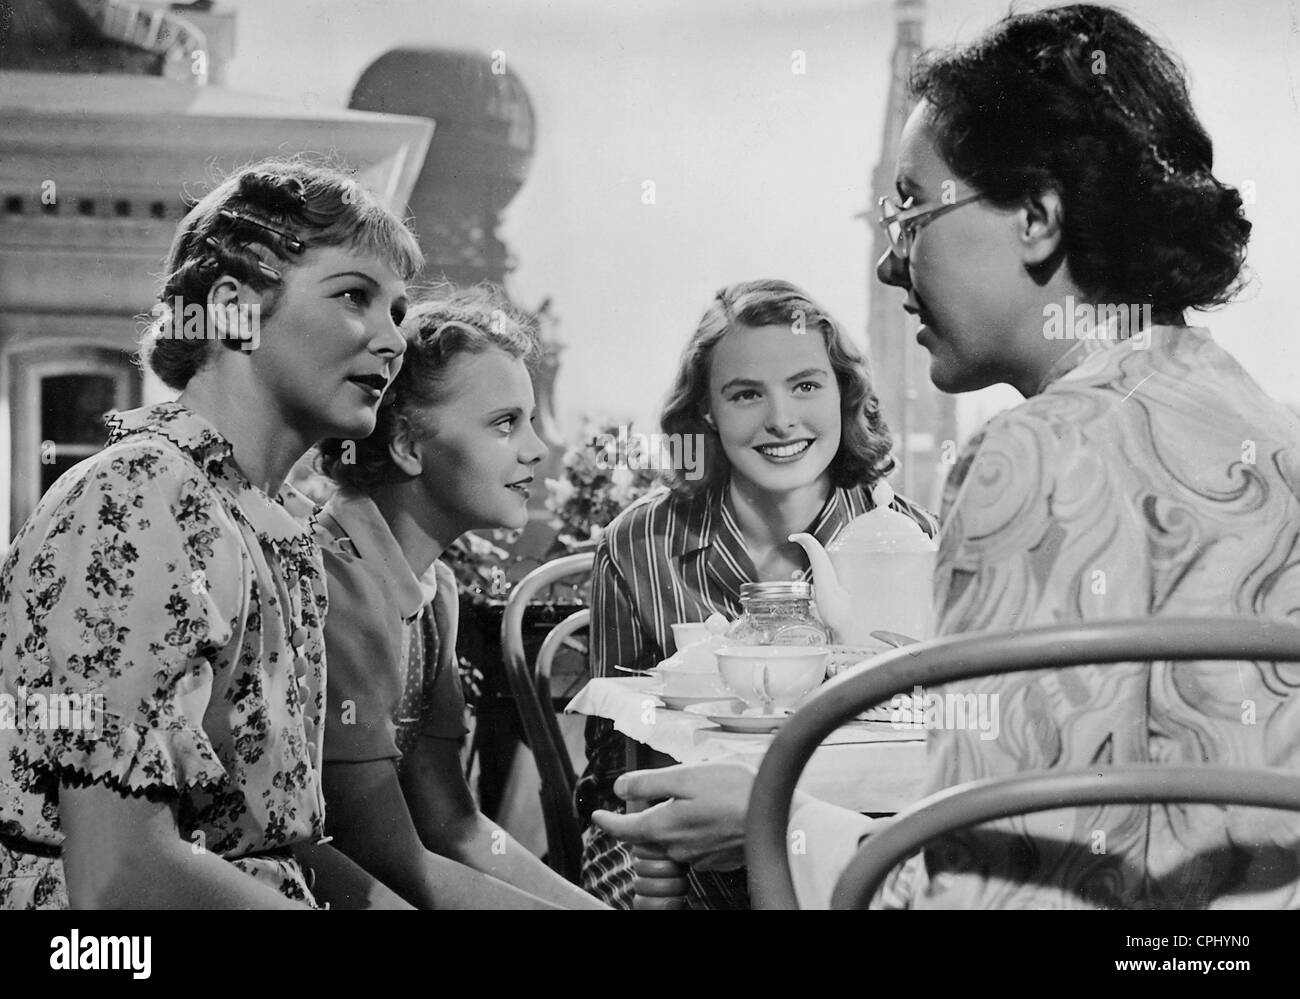 Carsta Loeck, Sabine Peters, Ingrid Bergman and Ursula Herking in 'The Four Companions', 1938 Stock Photo